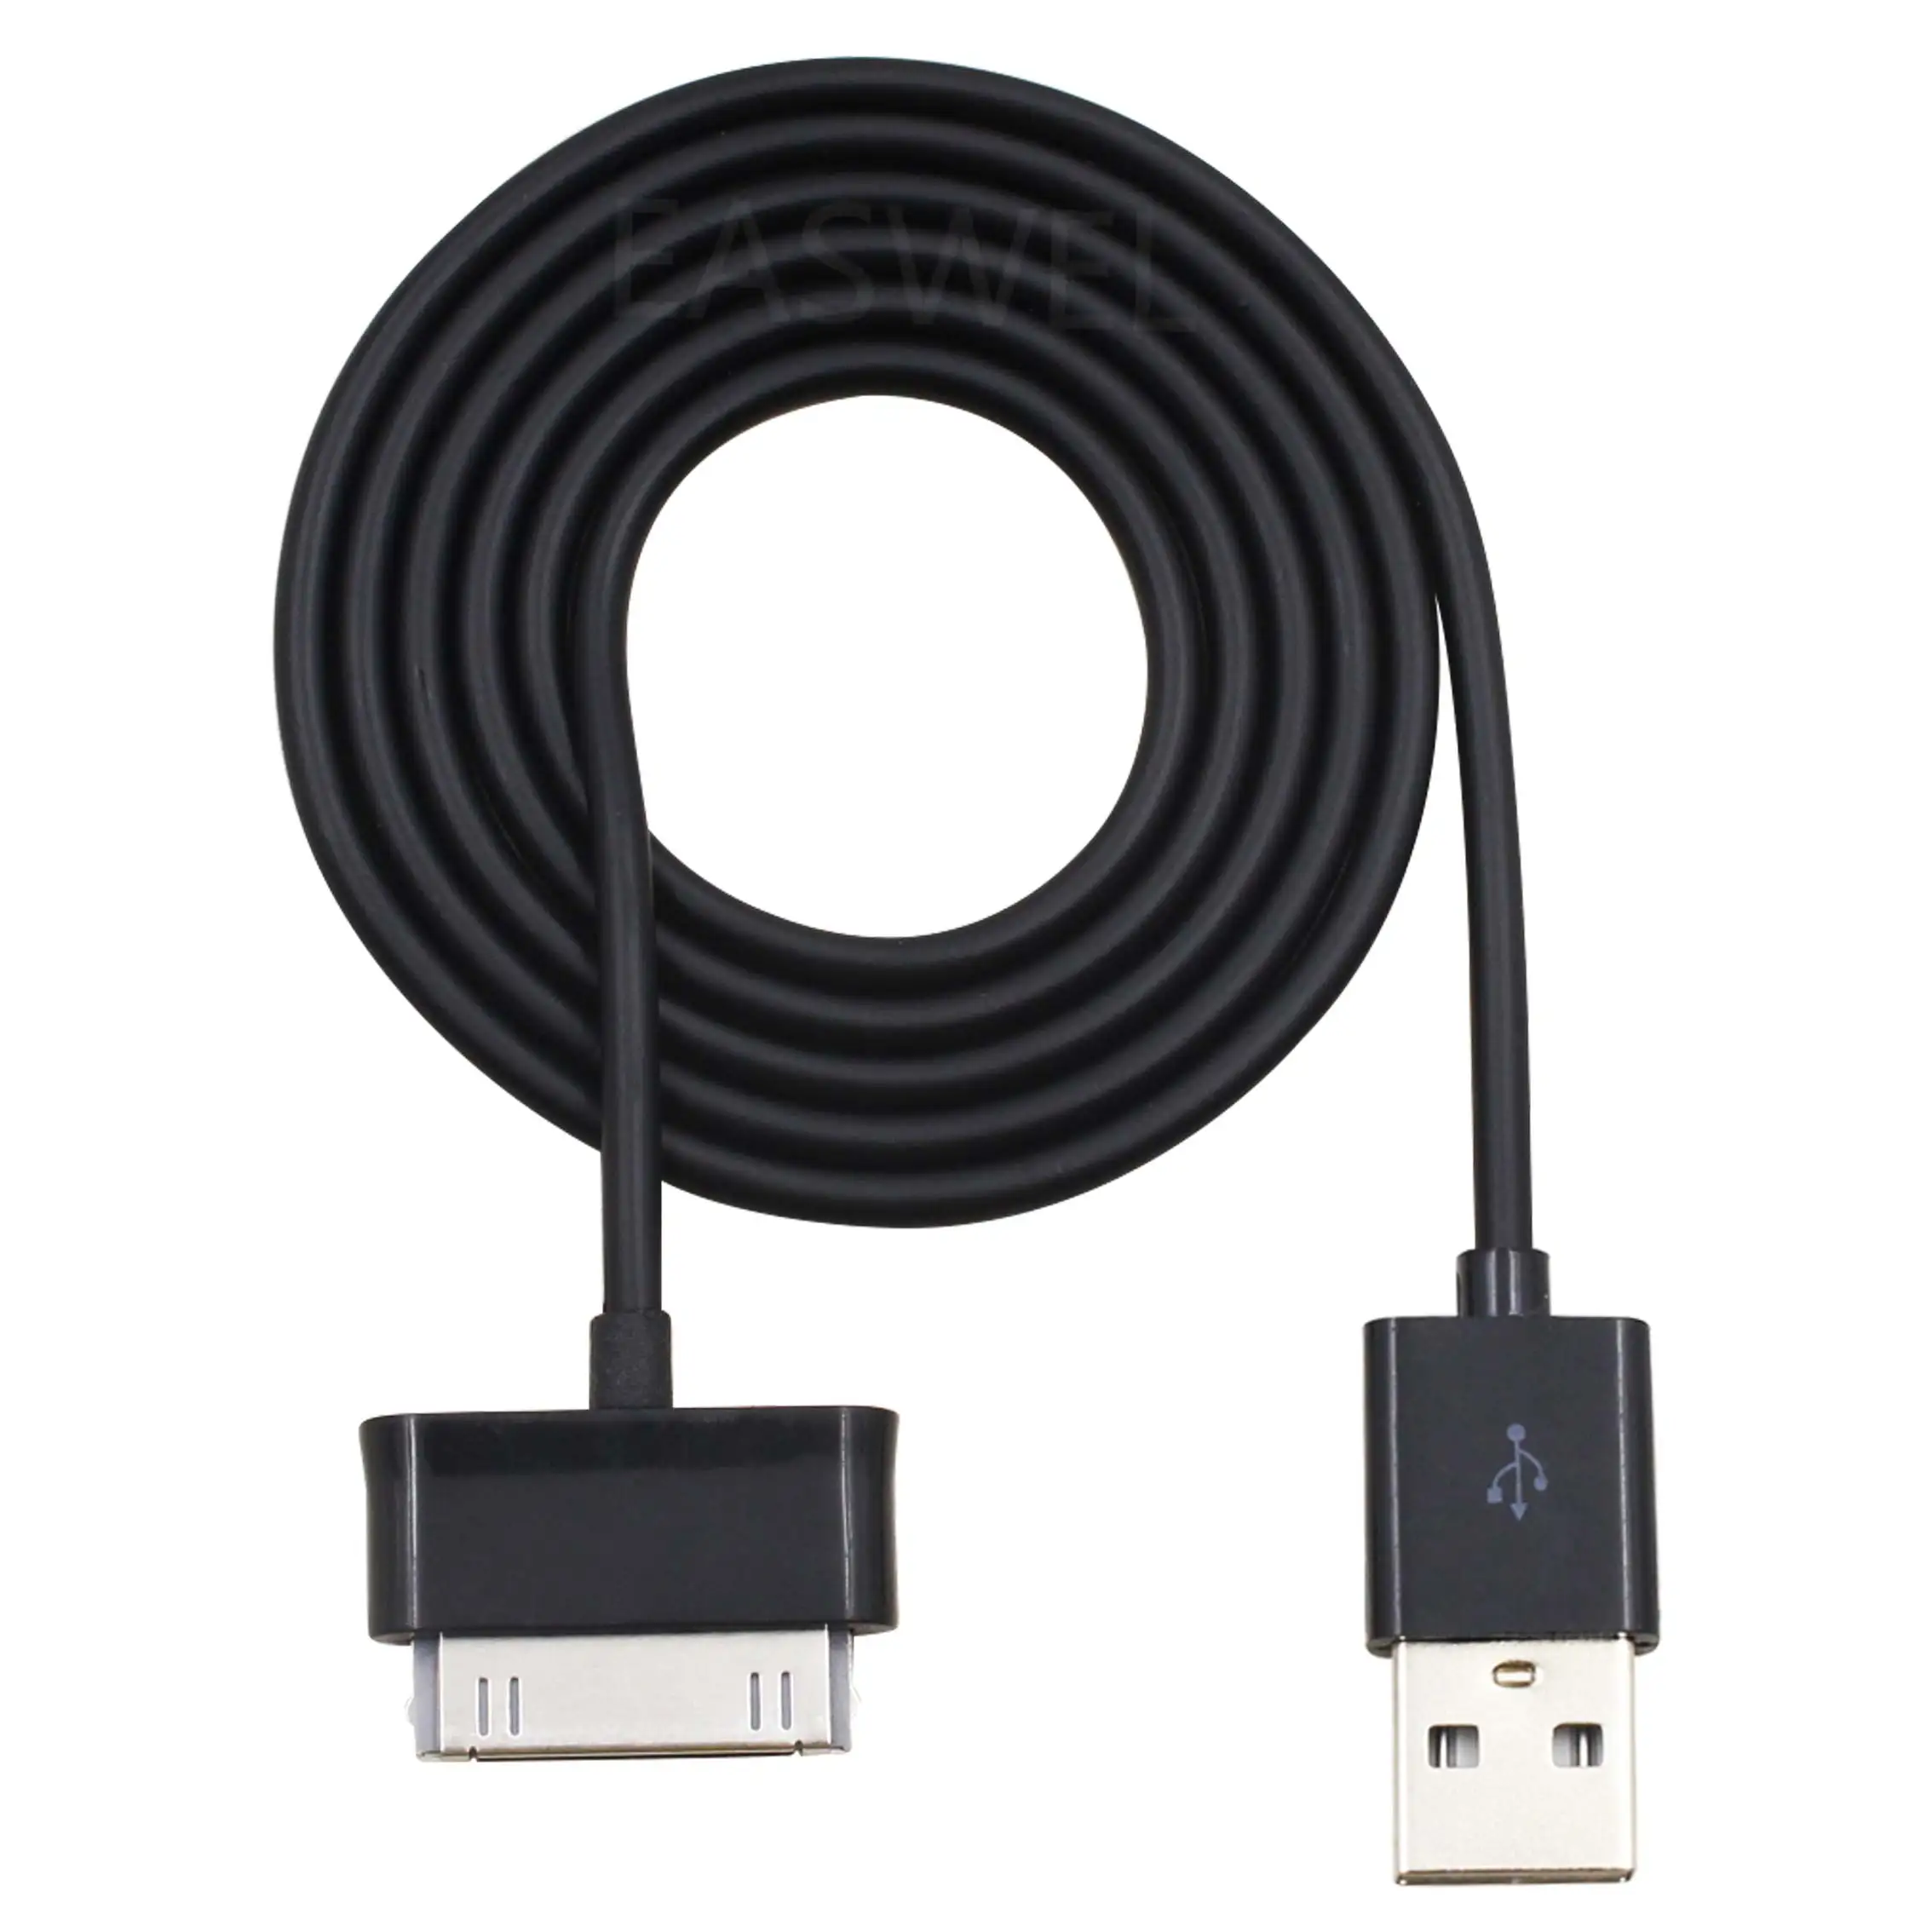 USB Data Charger Cable Cord Wire for Samsung Galaxy Tab2 Tab 2 GT-P3113TS Tablet 